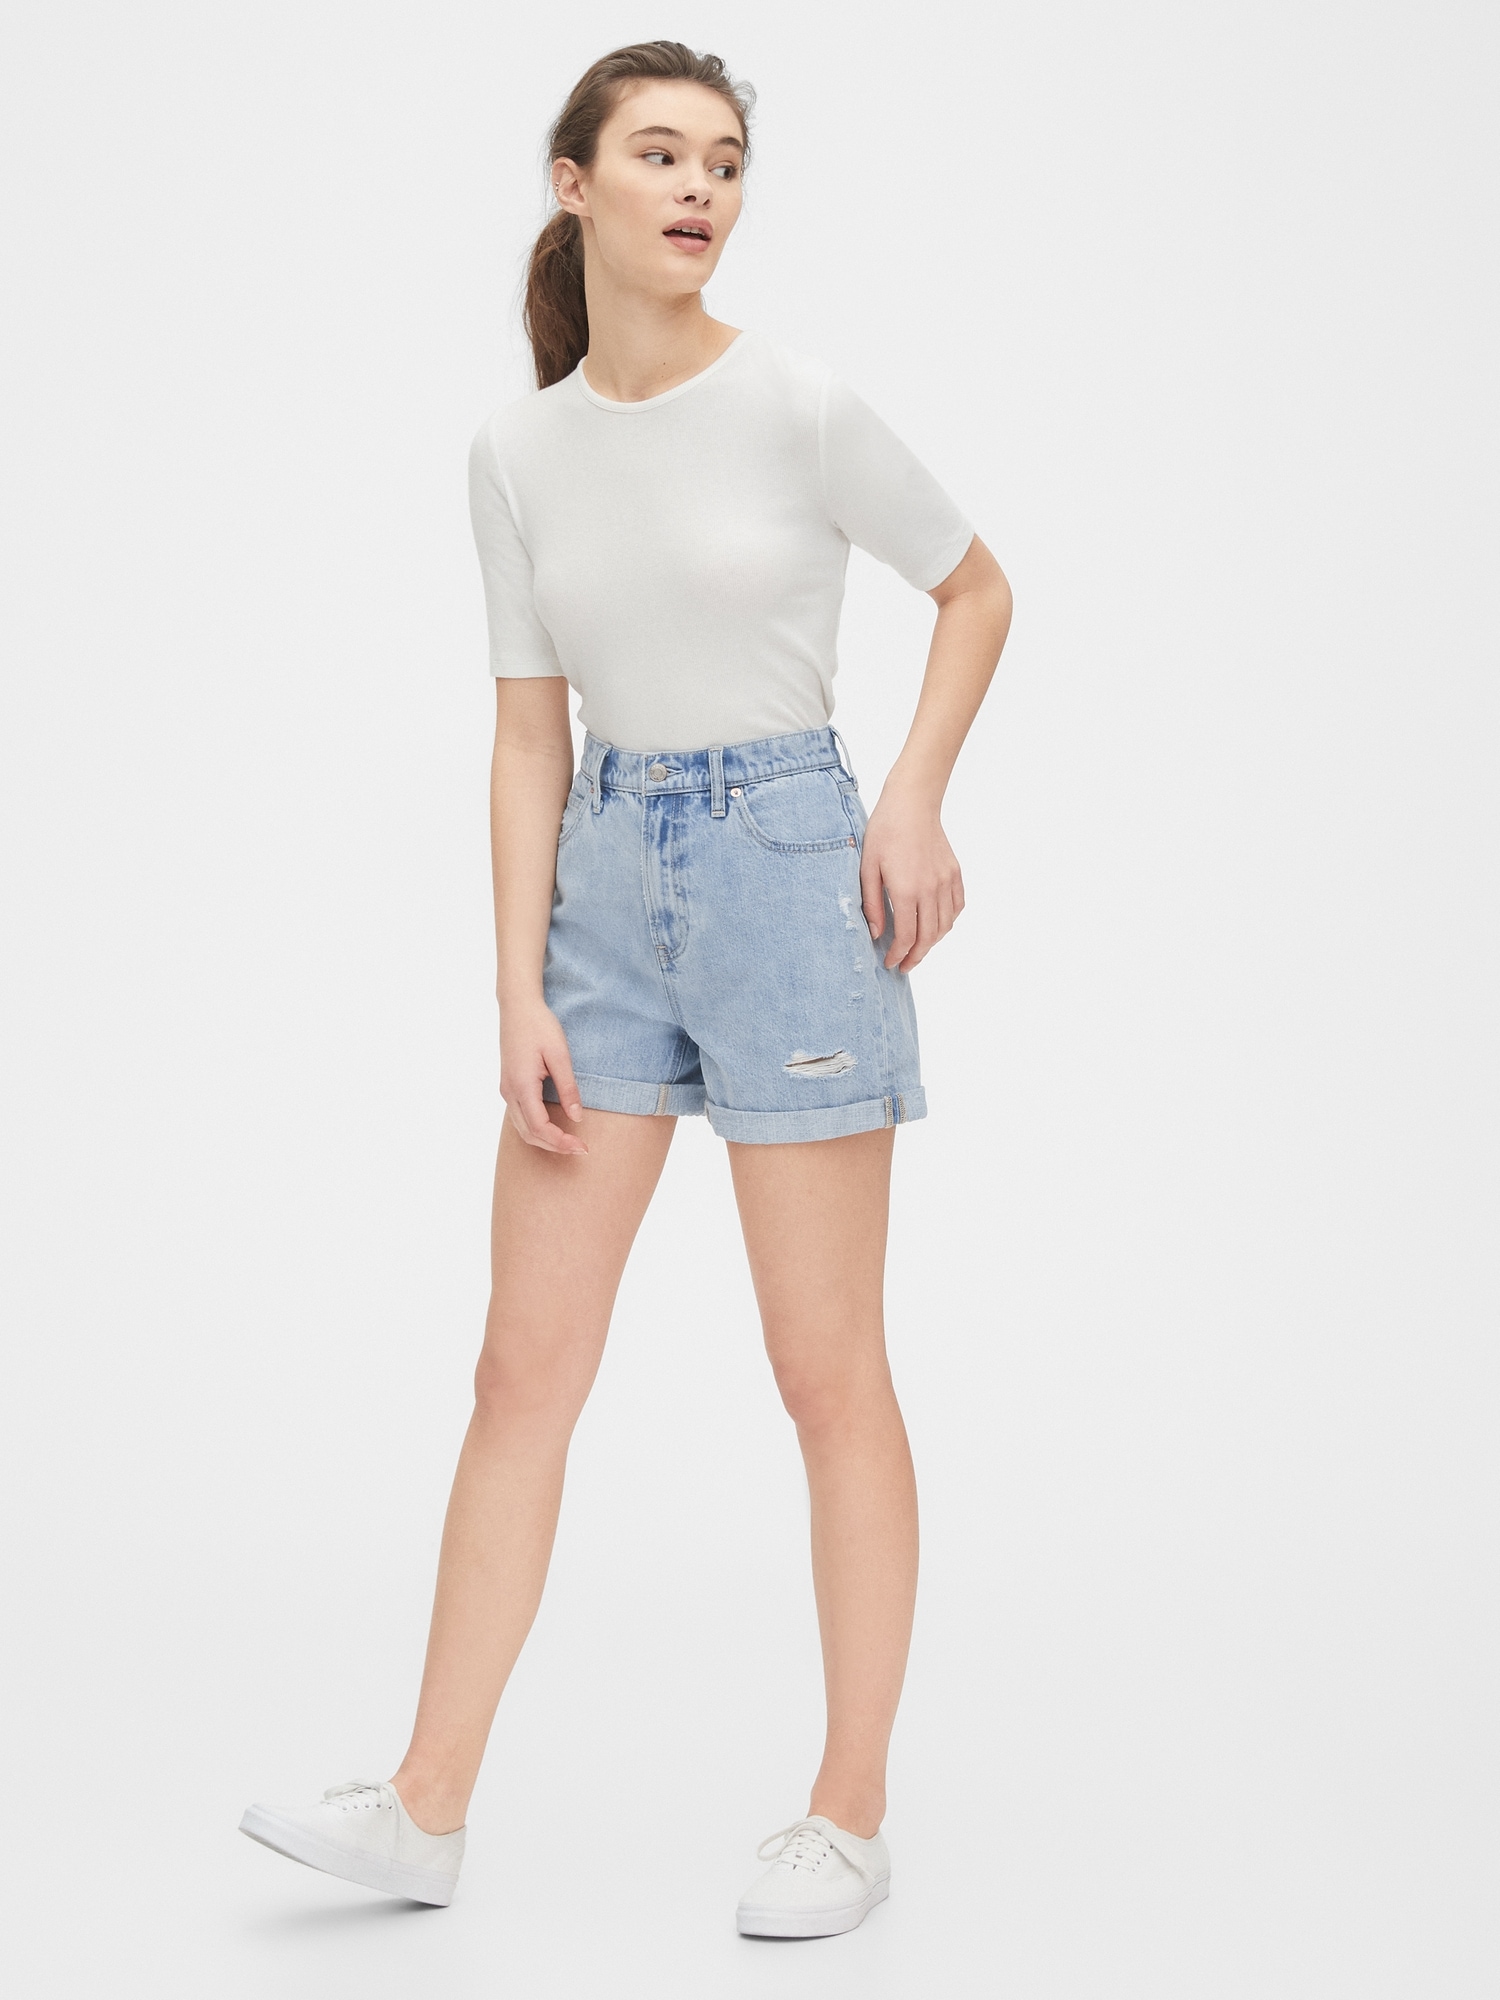 High Waisted Denim Roll Up Denim Mom Shorts For Women Benuynffy Streetwear  Casual Summer Fashion Loose Fit Jeans Style 230503 From Kong003, $19.19